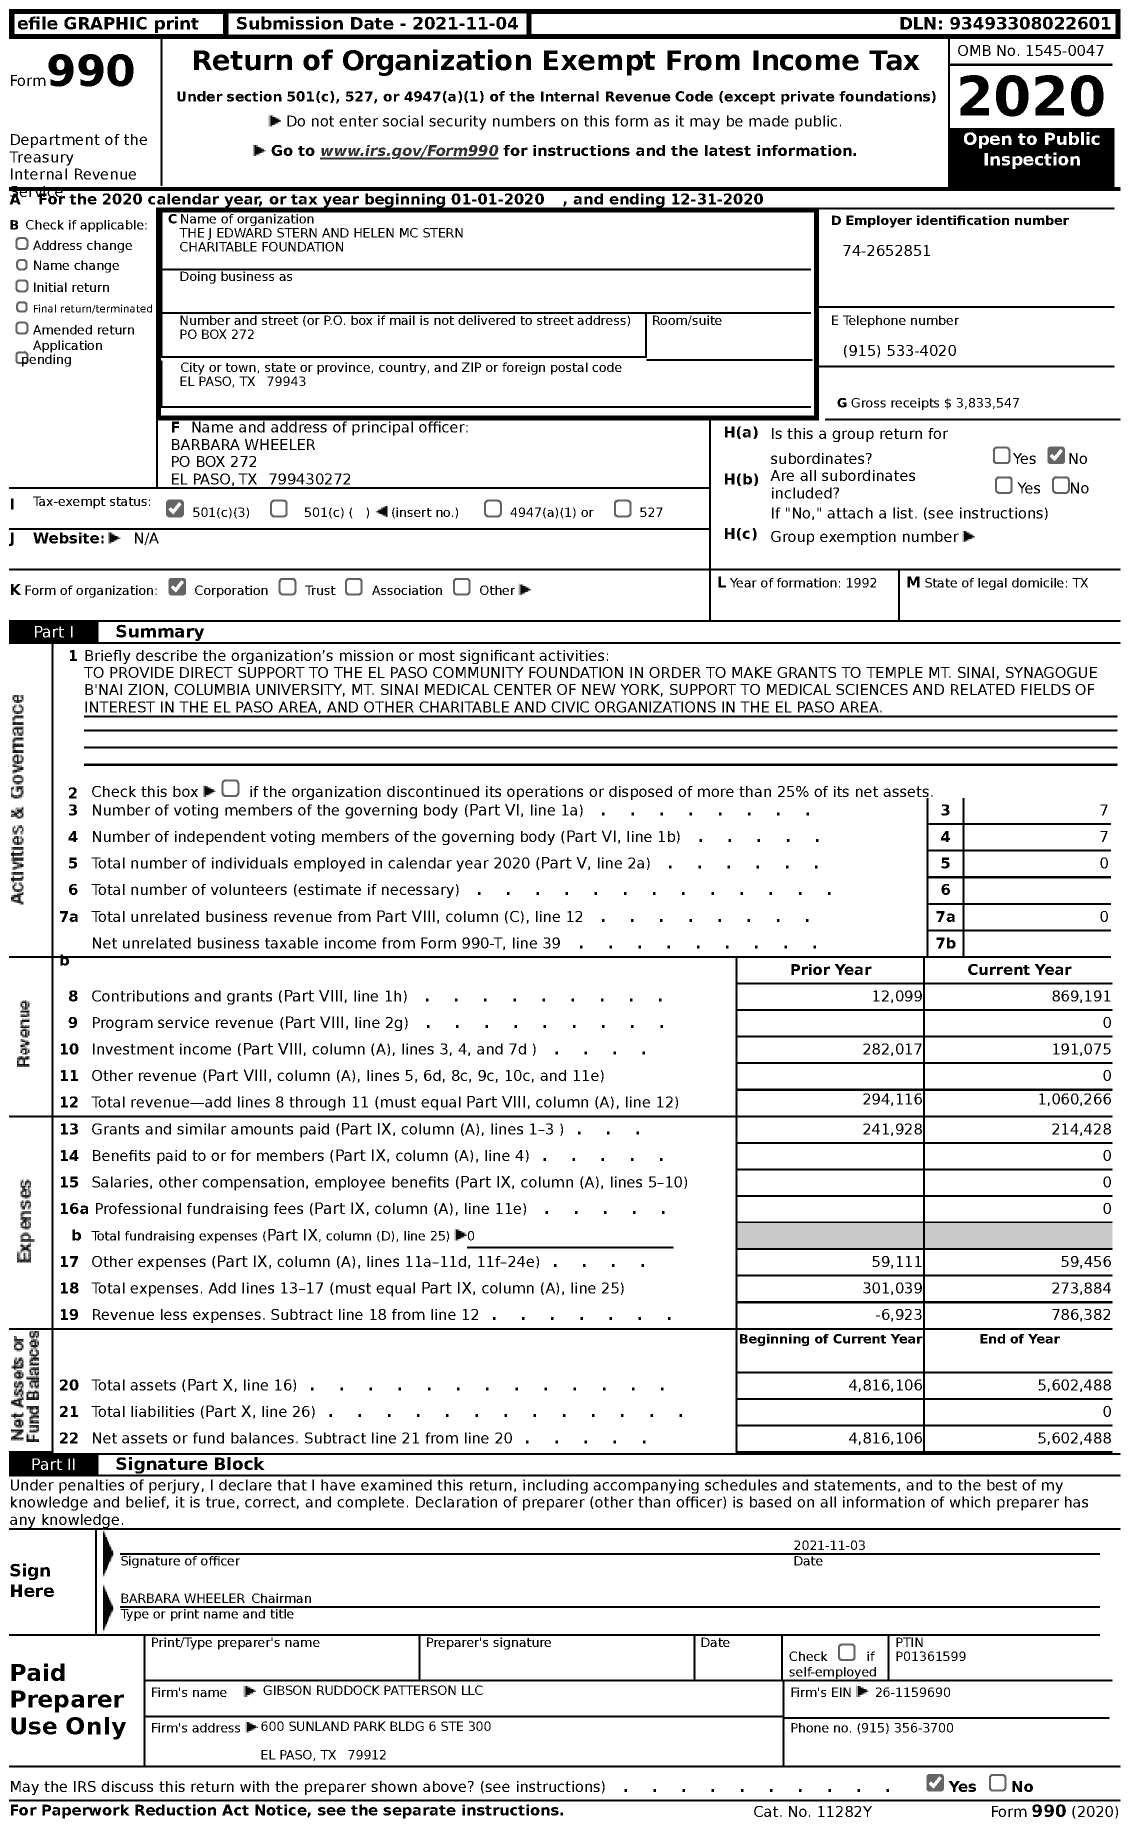 Image of first page of 2020 Form 990 for The J Edward Stern and Helen MC Stern Charitable Foundation